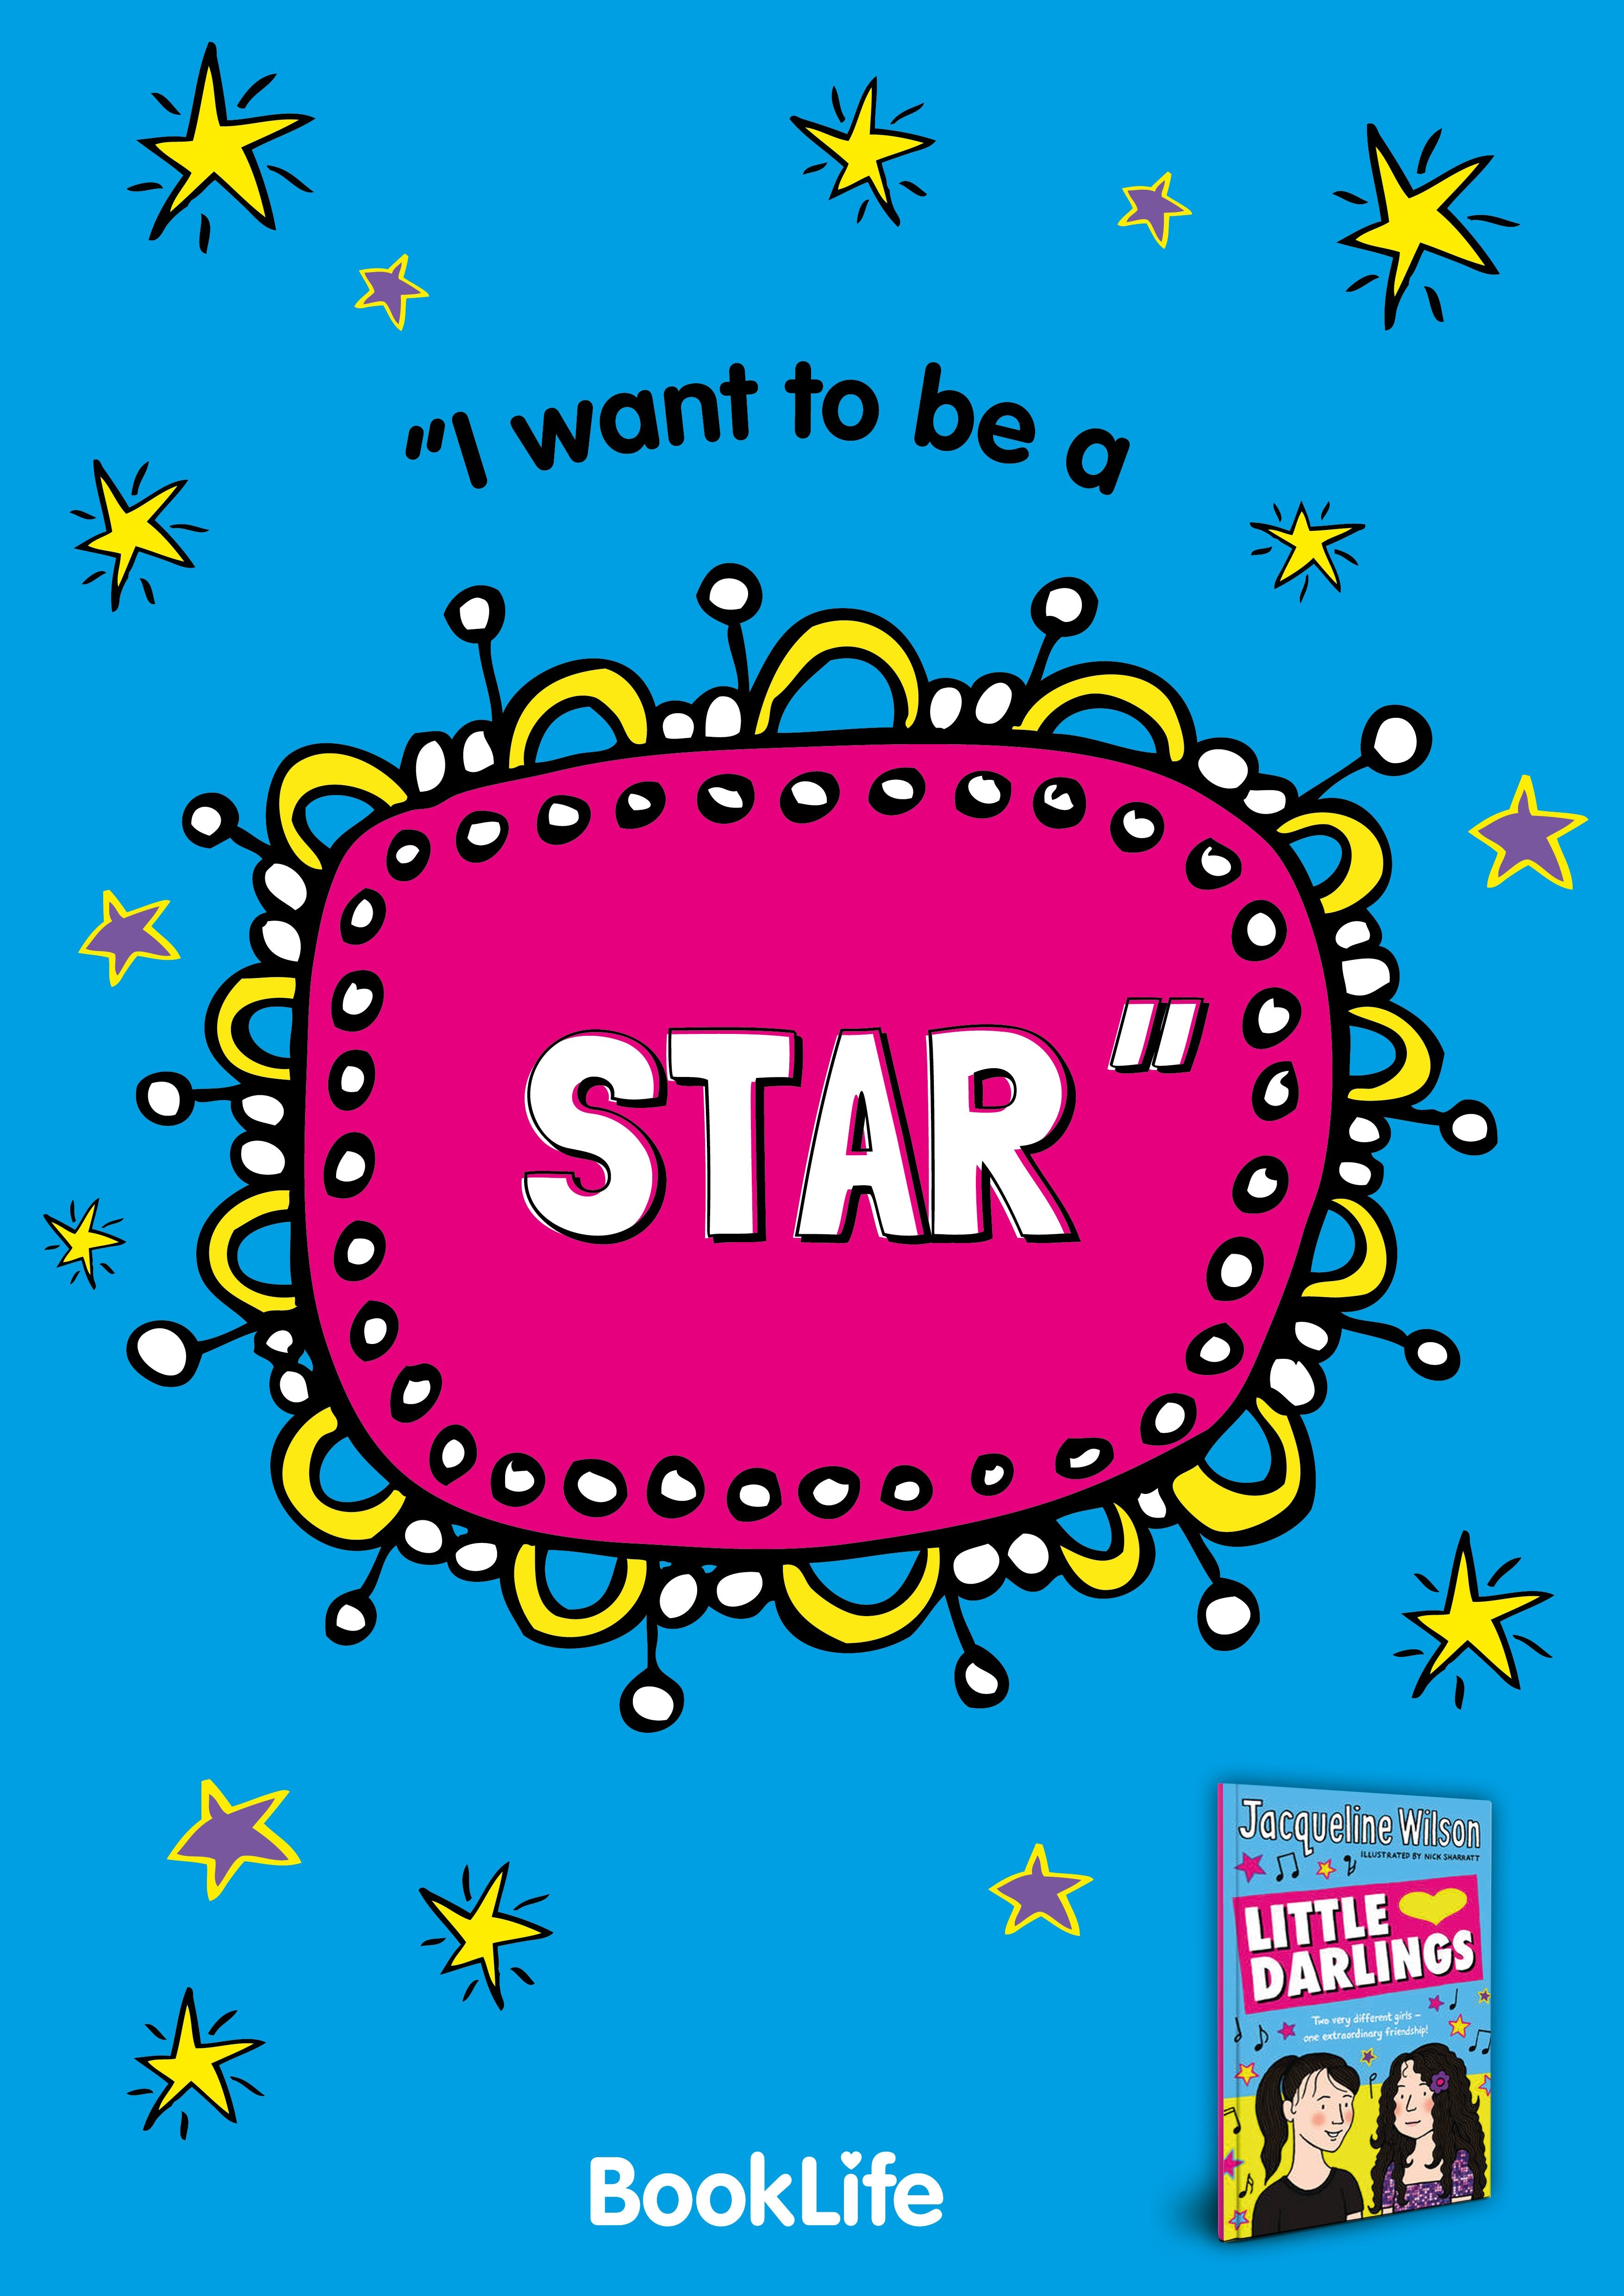 Free Jacqueline Wilson "I want to be a star." Poster by BookLife